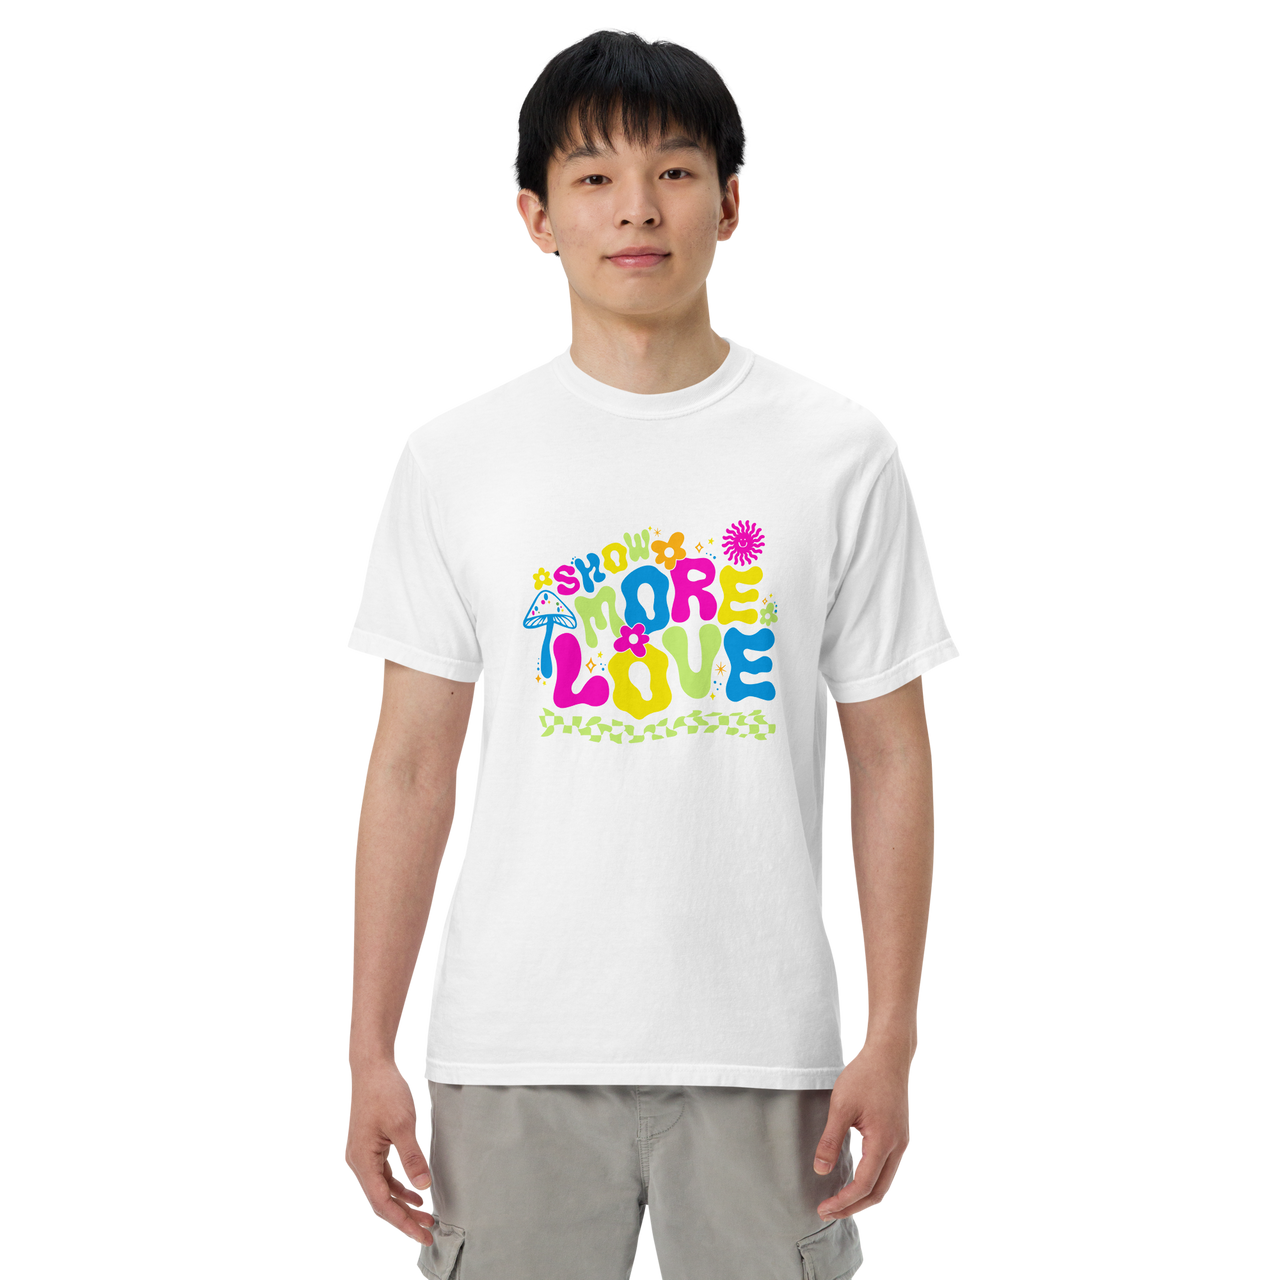 Show More Love Color Tee - Comfort Colors